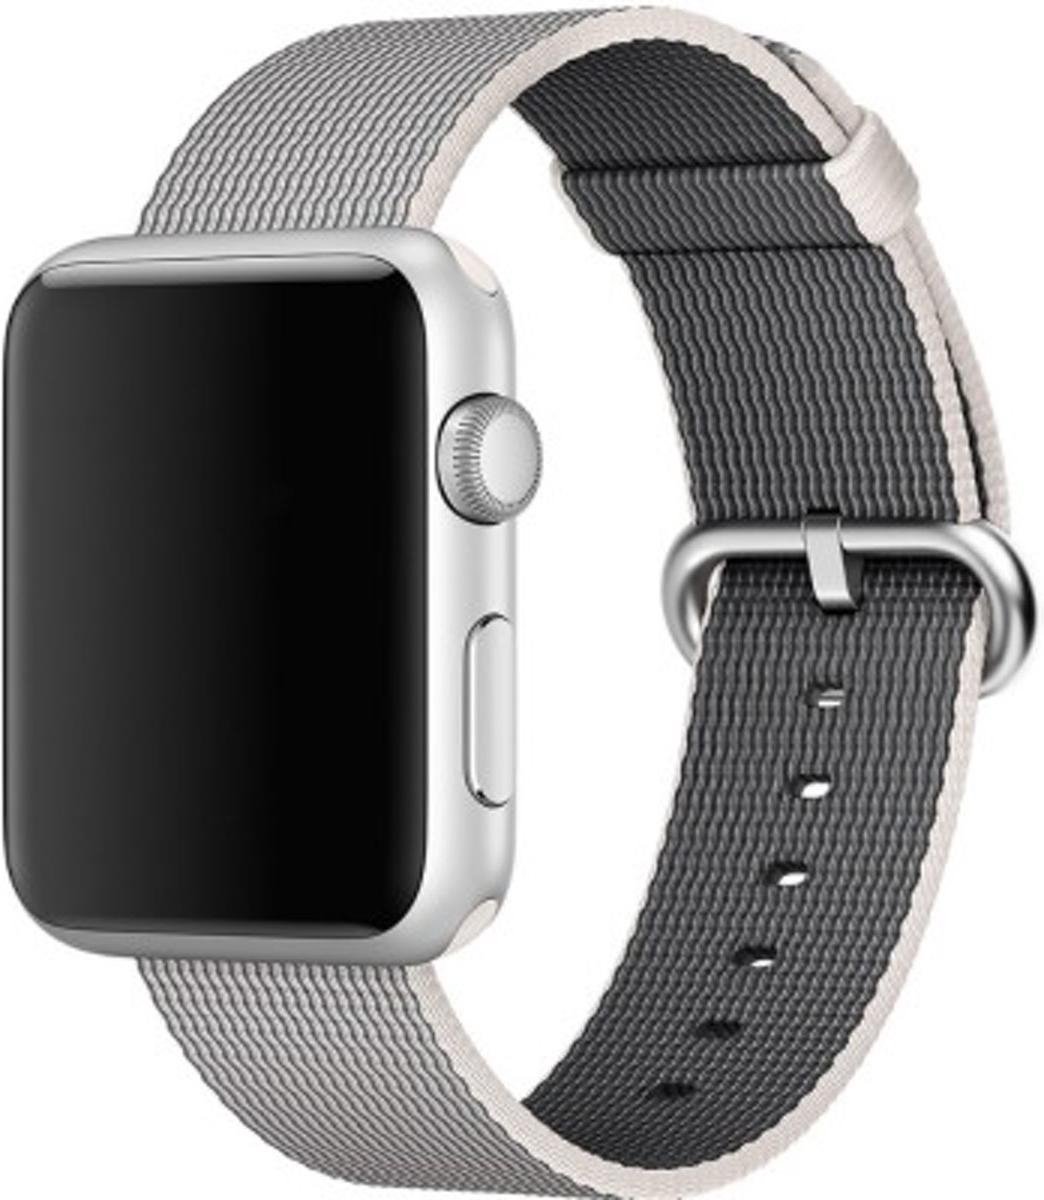 Nylon Band Voor Apple Watch Series 1/2/3/4/5 42 MM /44 MM - iWatch Armband  Polsband... | bol